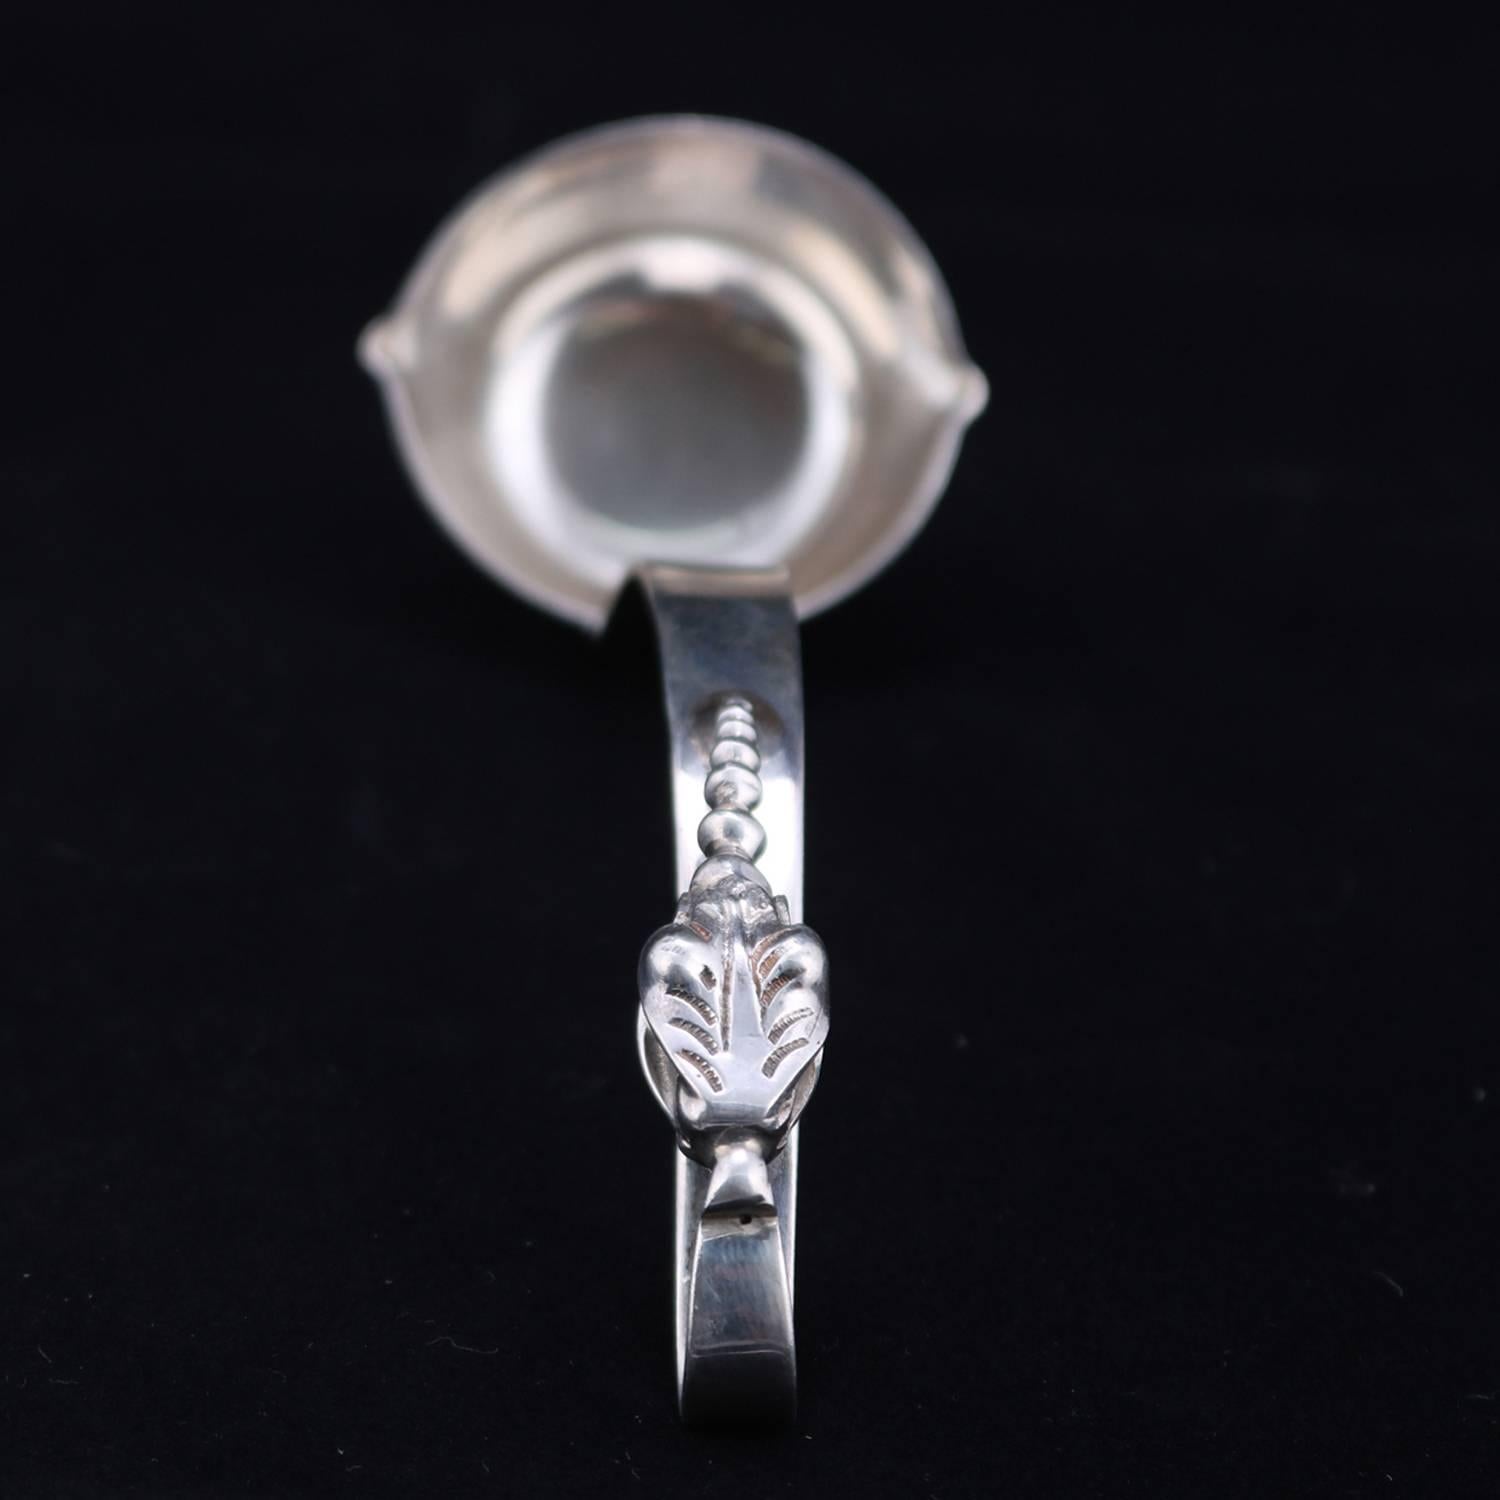 Mexican sterling silver serving sauce ladle features open handle with applied stylized foliate decoration, bowl with opposing pour spouts marked en verso Made in Mexico and Sterling, 2.54 toz, circa 1880.

***DELIVERY NOTICE – Due to COVID-19 we are